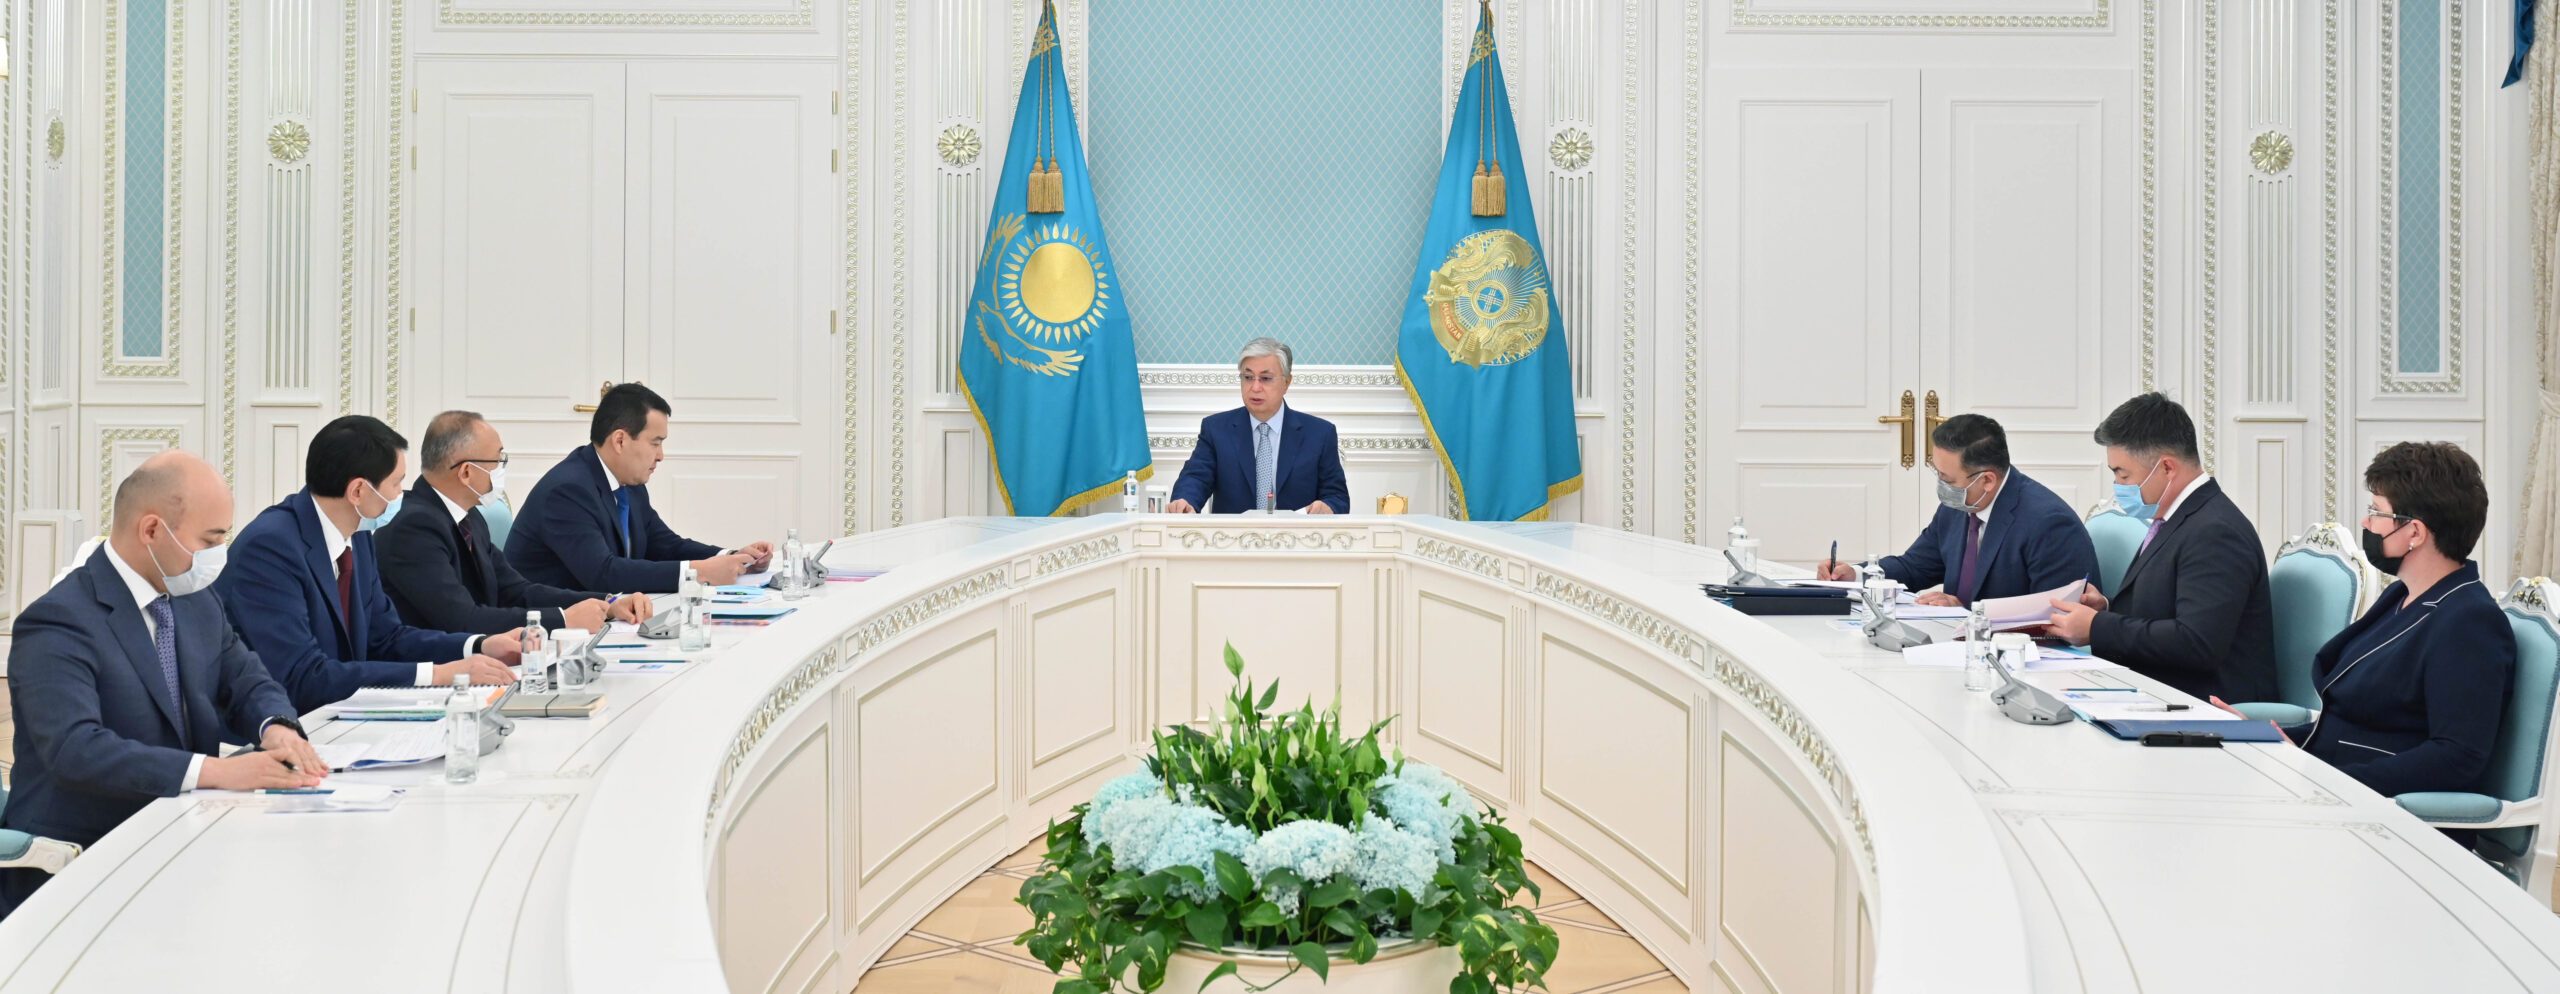 President Tokayev Discusses Nation’s Budget Planning With Top Officials ...